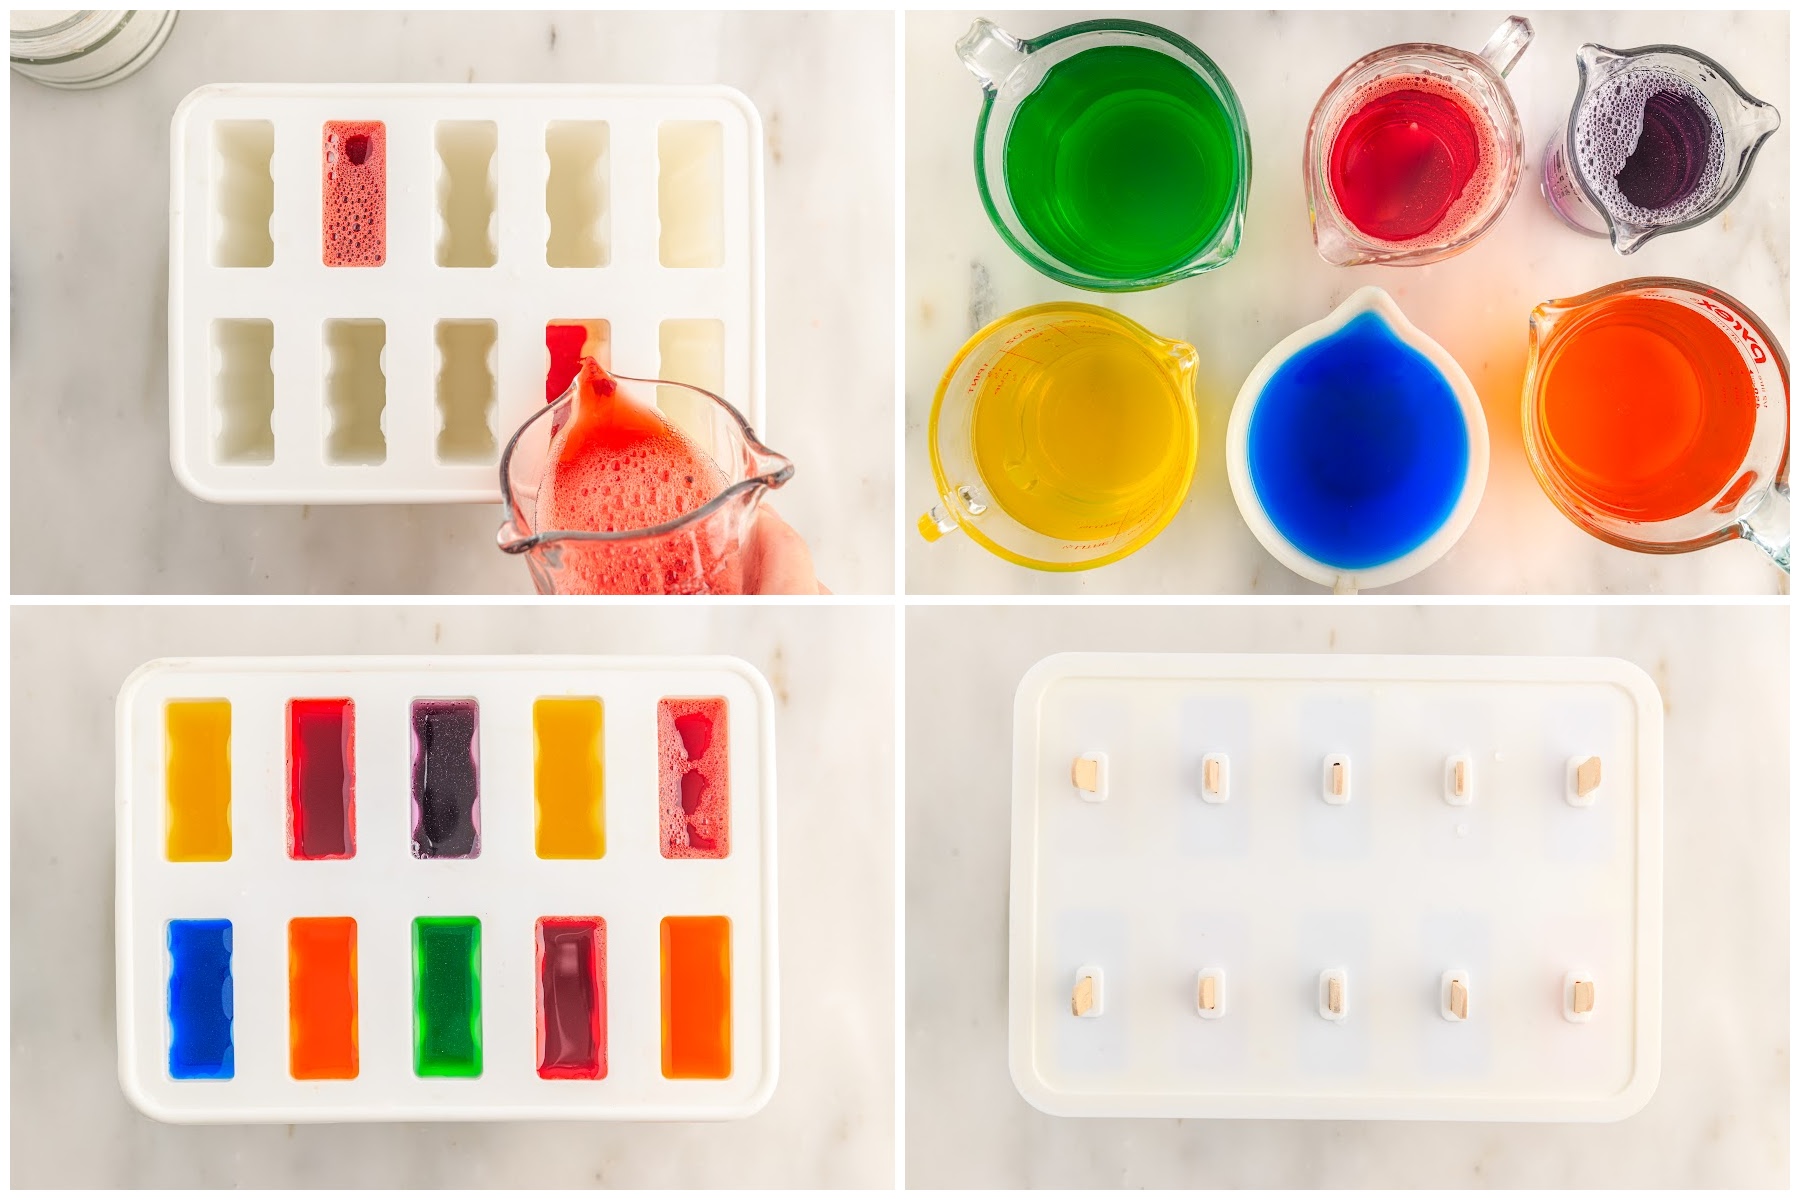 Four images of Popsicle molds being filled.